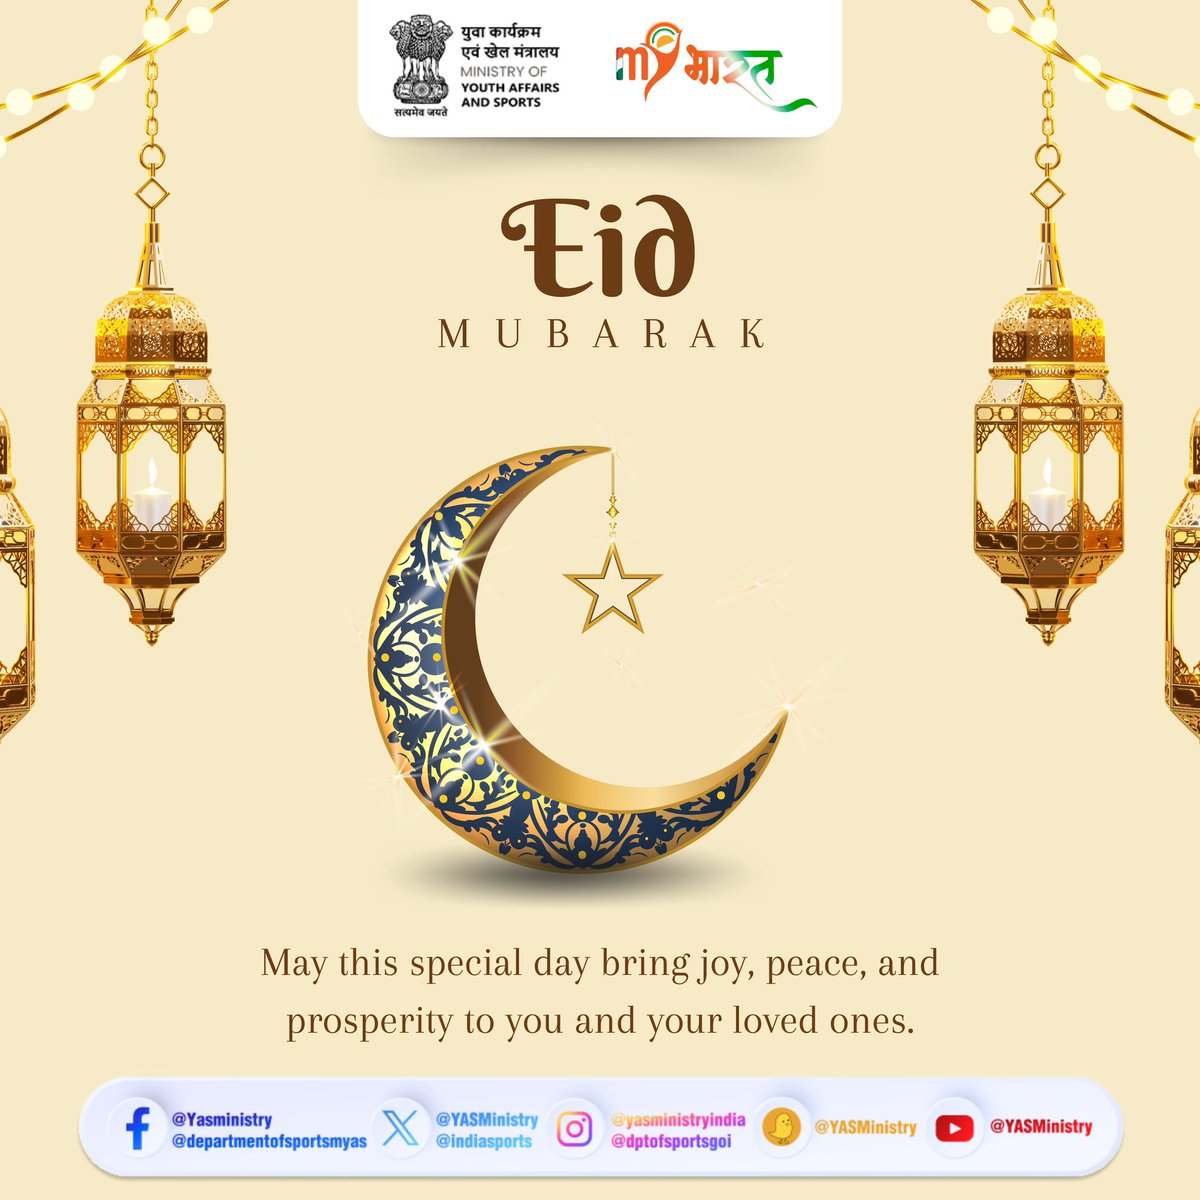 Ministry of Youth Affairs and Sports Wishes everyone a joyous and Happy #Eid! May this special day bring peace, happiness, and unity to all. Eid Mubarak! ✨🌙